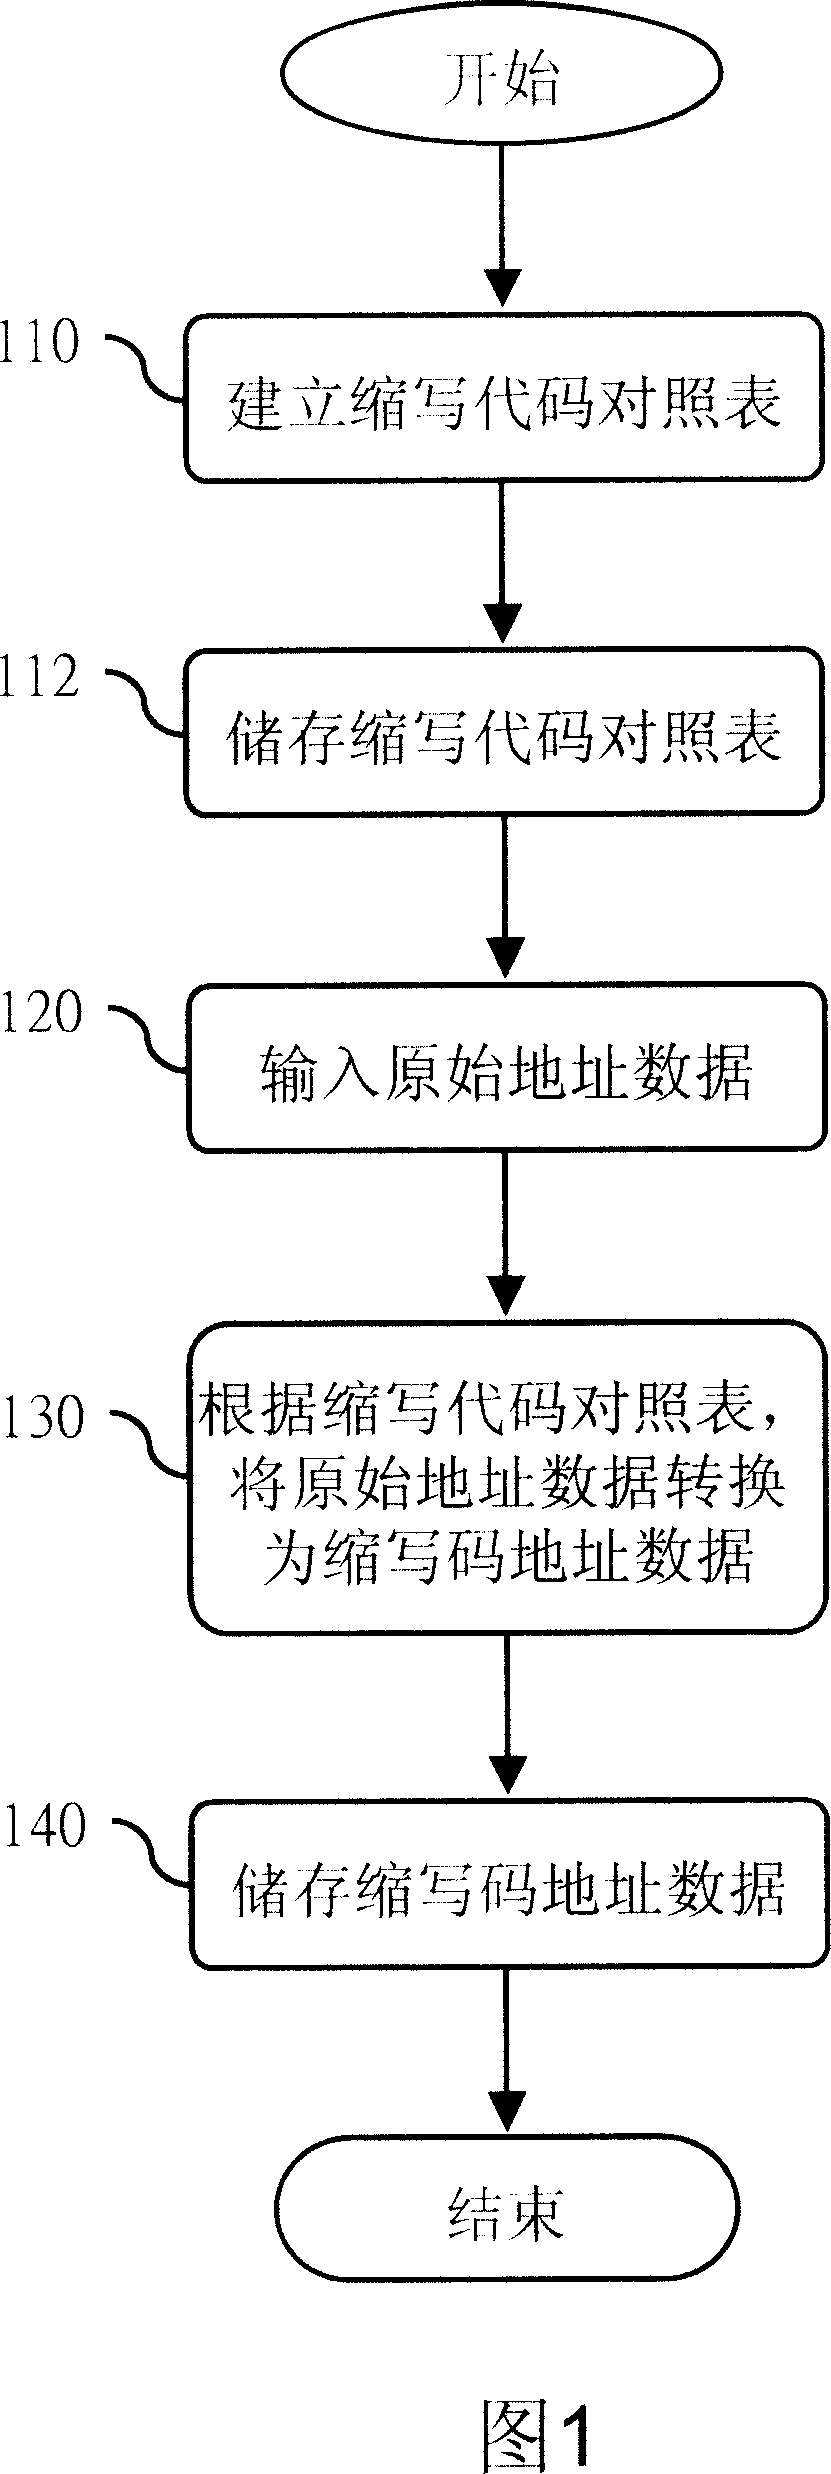 Method of transforming original address date for reducing address memory space with the code